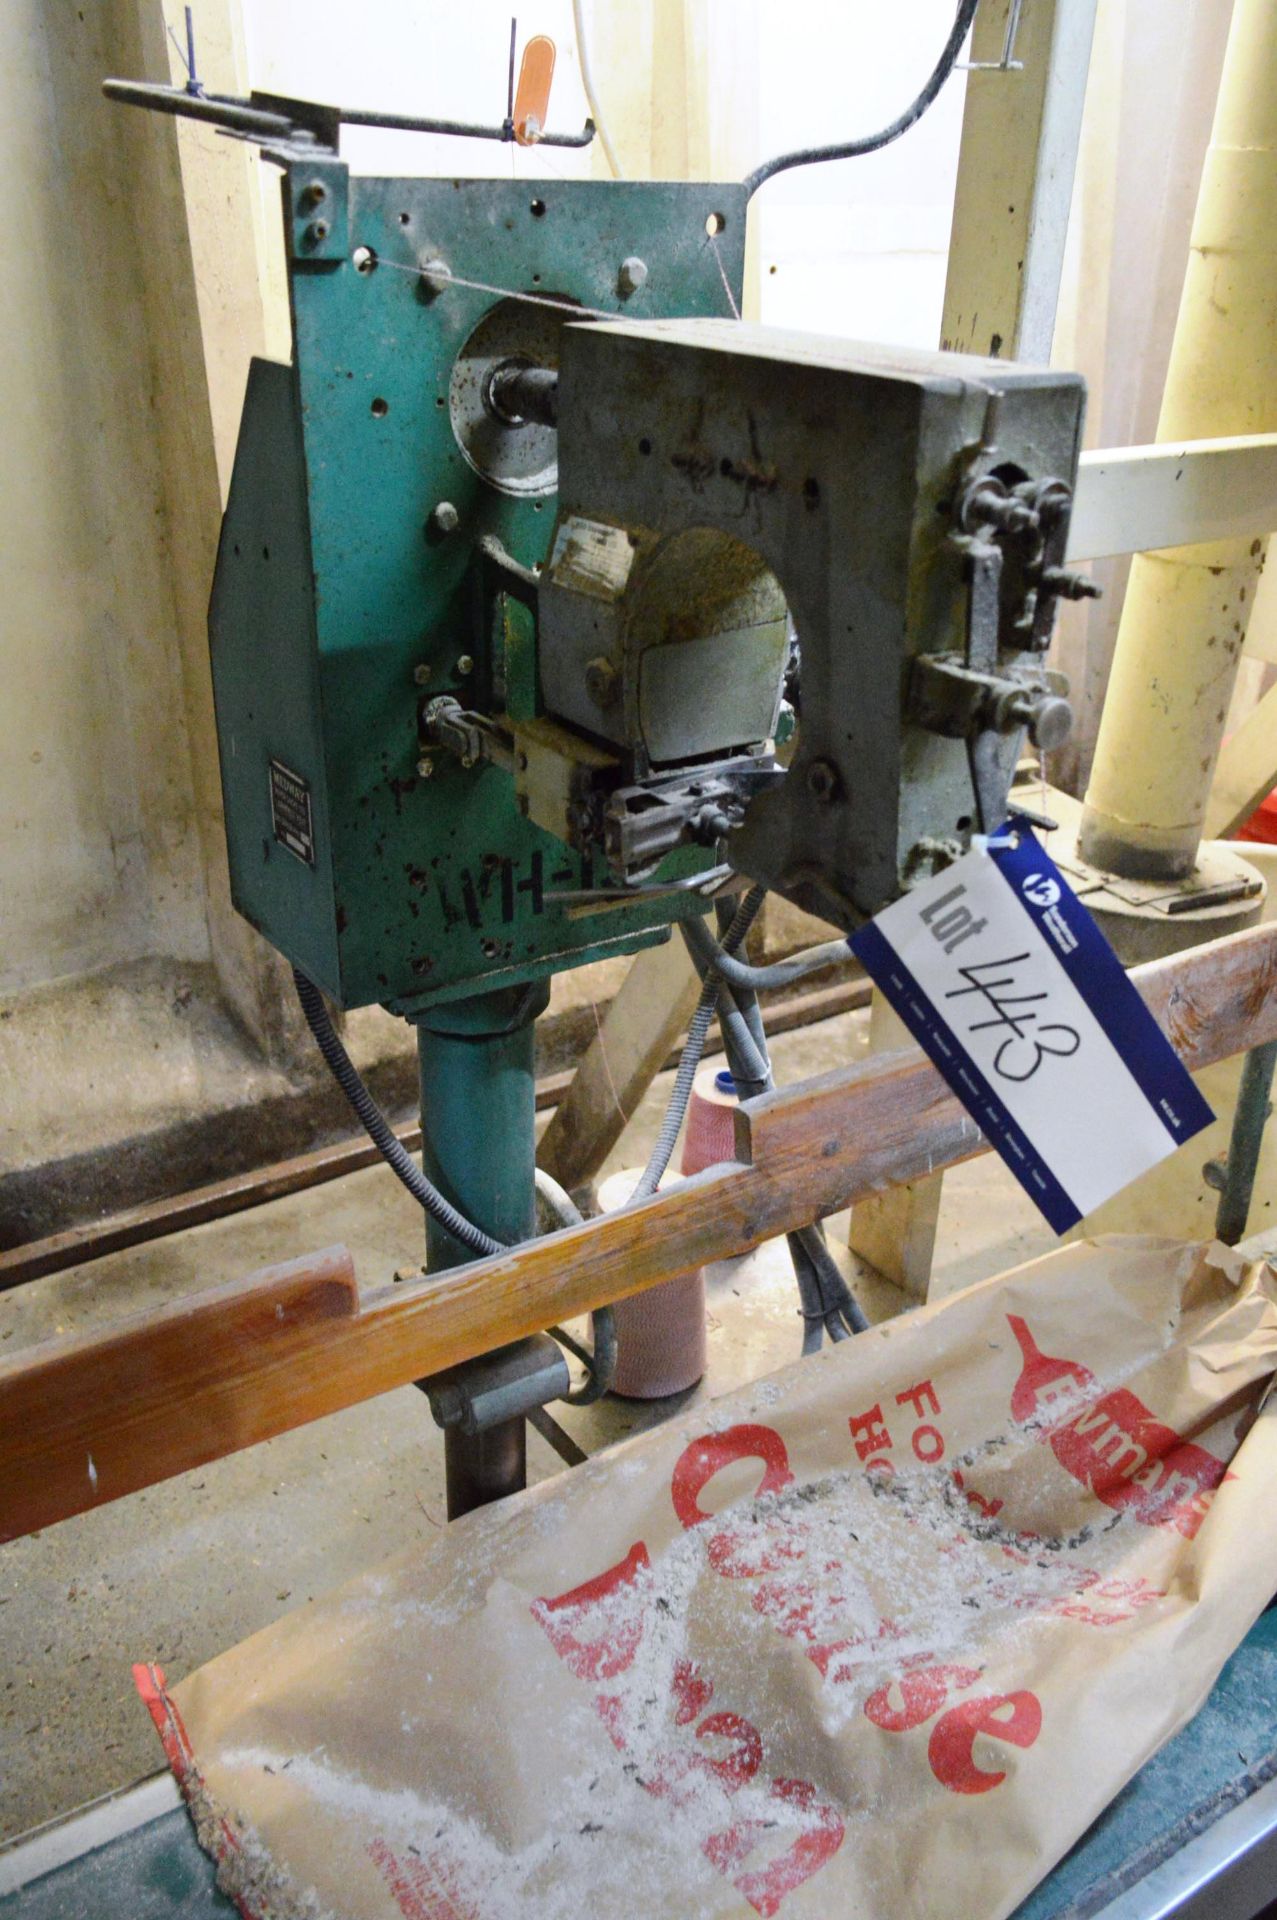 *Medway D/C8 Pillar Stitcher, no. 1023, with Medway 150 stitching head and belt conveyor, 450mm x - Image 2 of 6